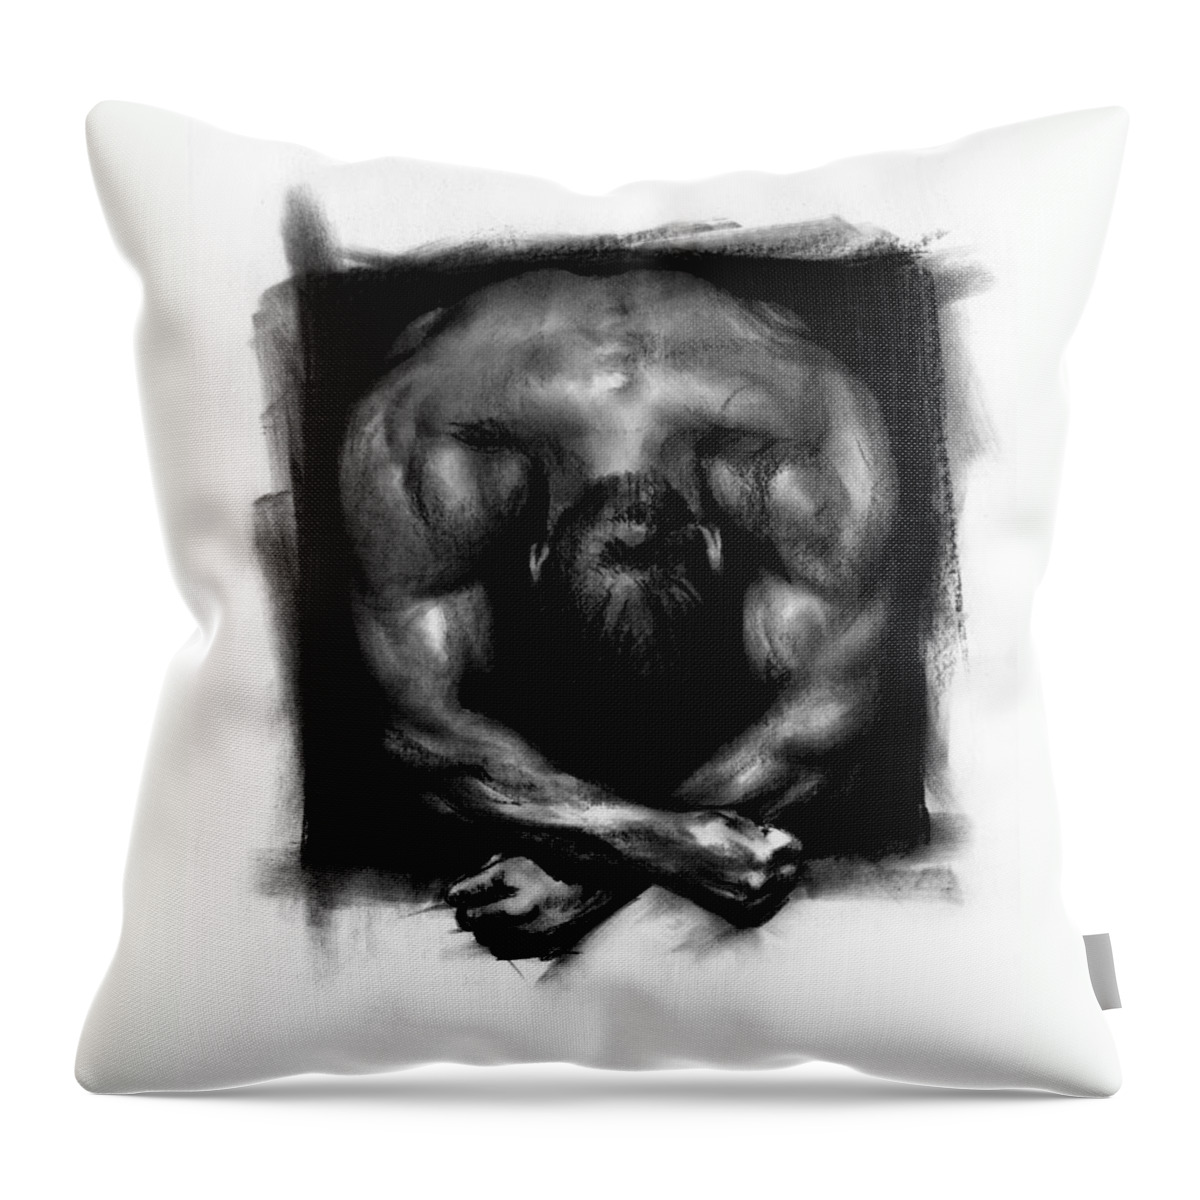 Figurative Throw Pillow featuring the drawing Despondent by Paul Davenport